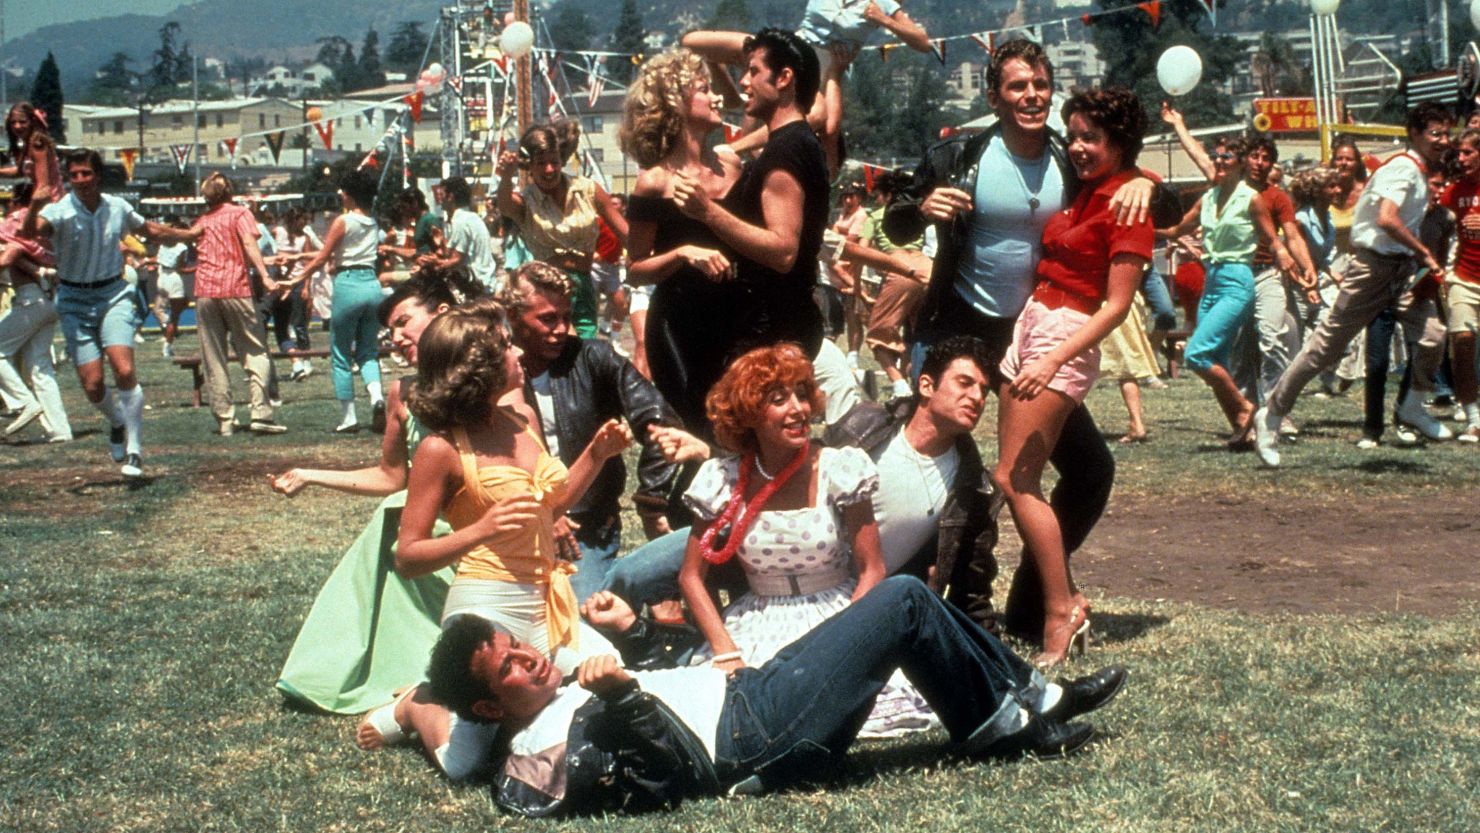 Olivia Newton John, John Travolta and the rest of the gang in a scene from the 1978 film "Grease."